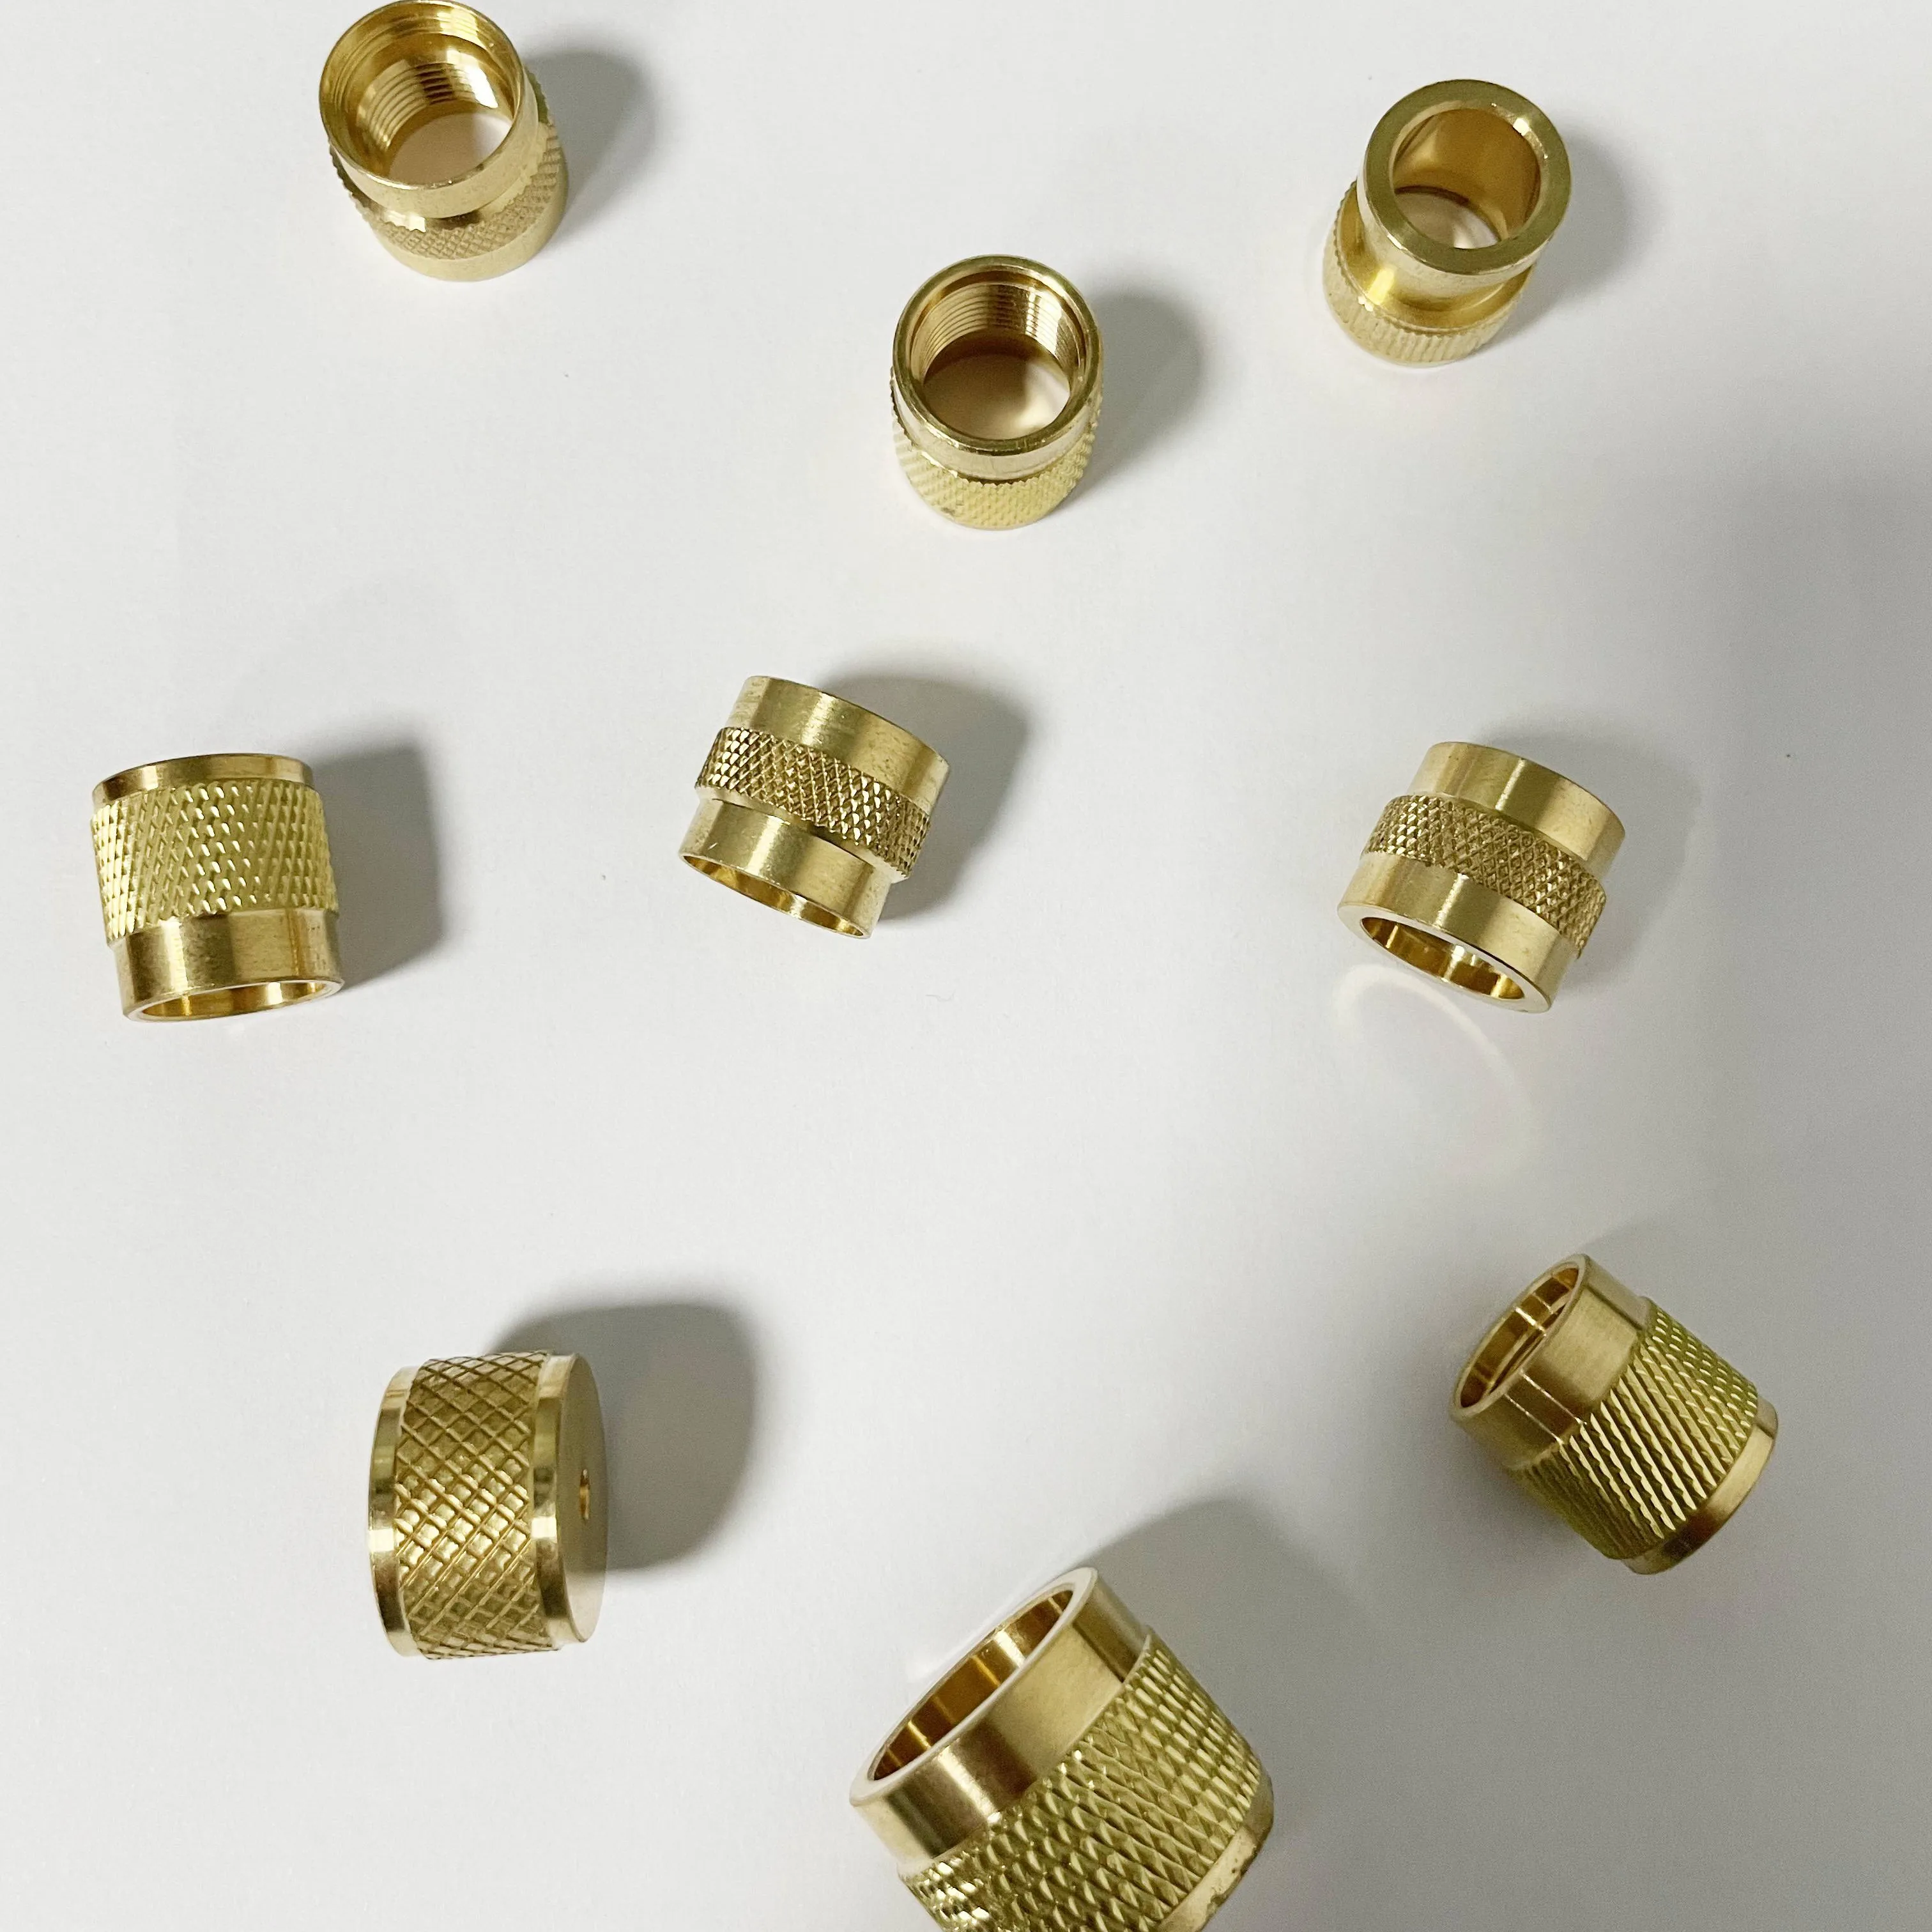 Factory customized non-standard turning parts Brass knurled round nuts Automotive water cooling accessories